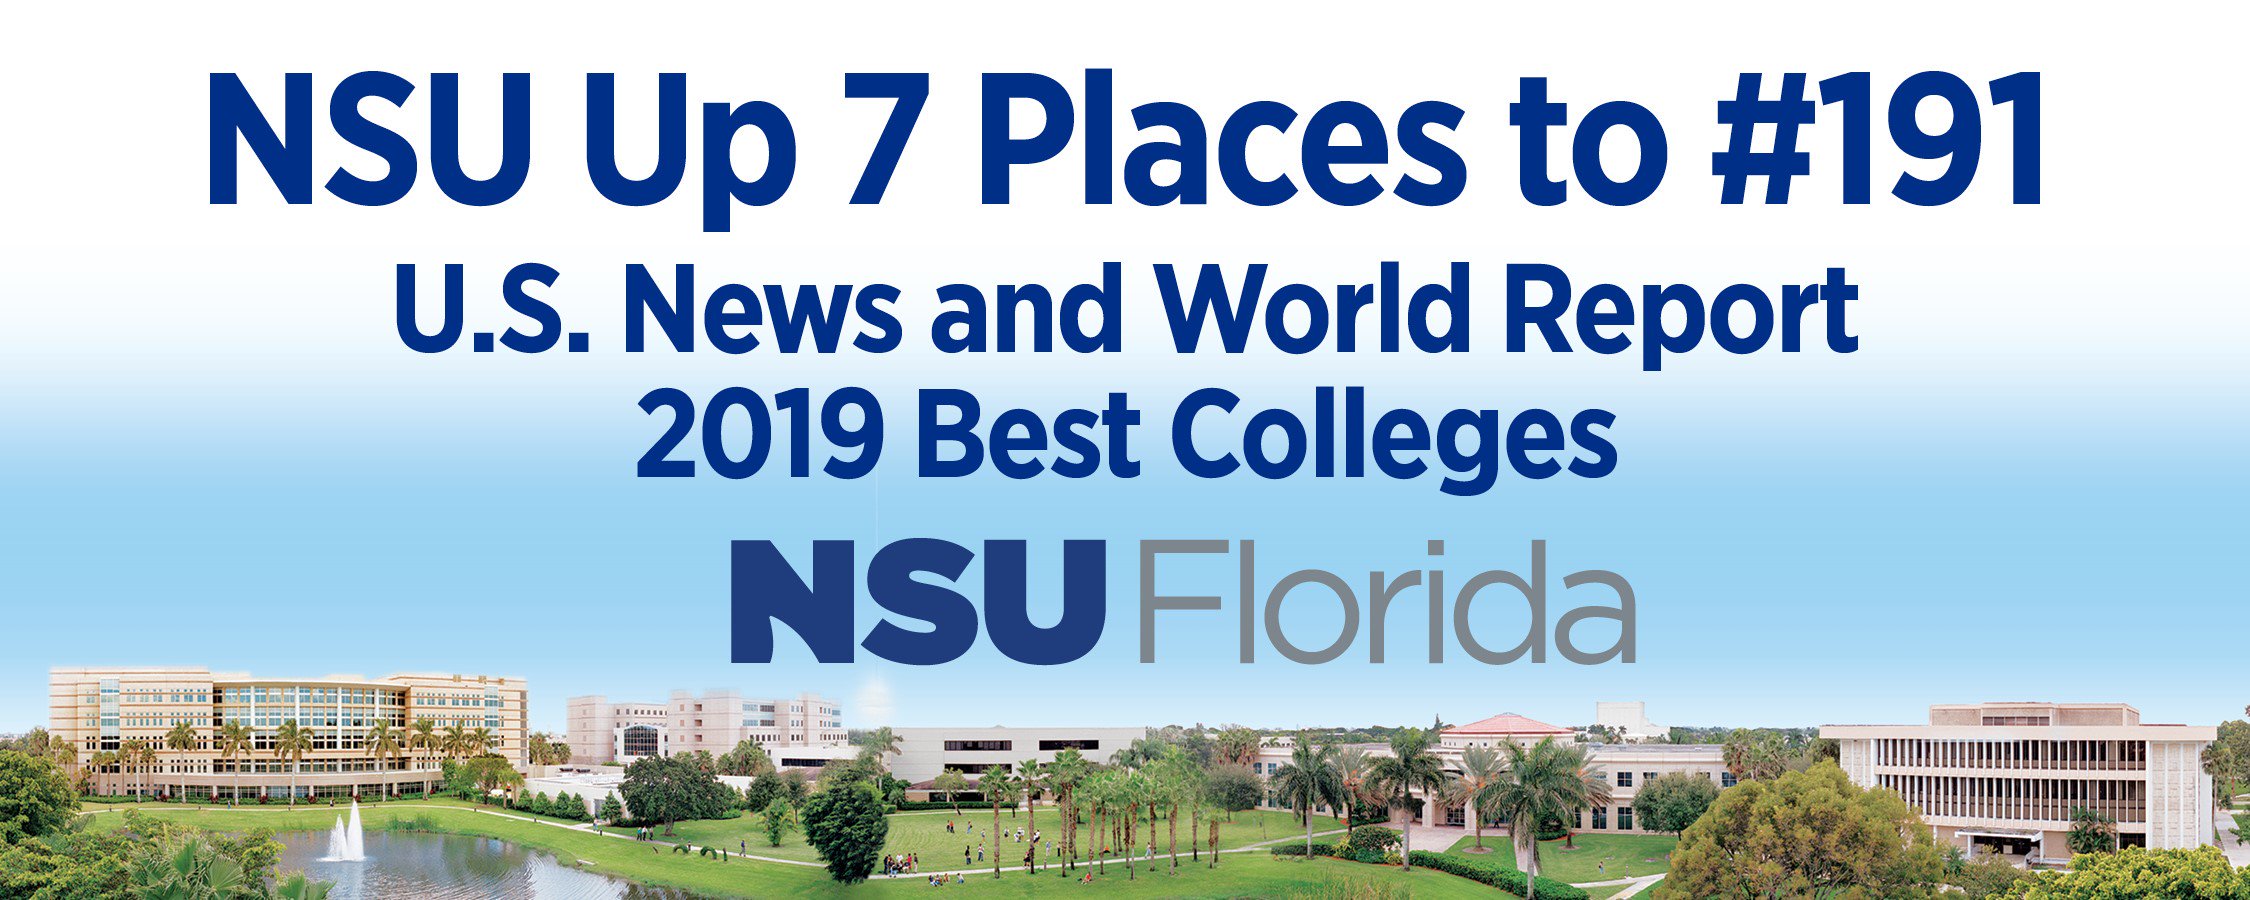 Campus Attractions at Nova Southeastern University